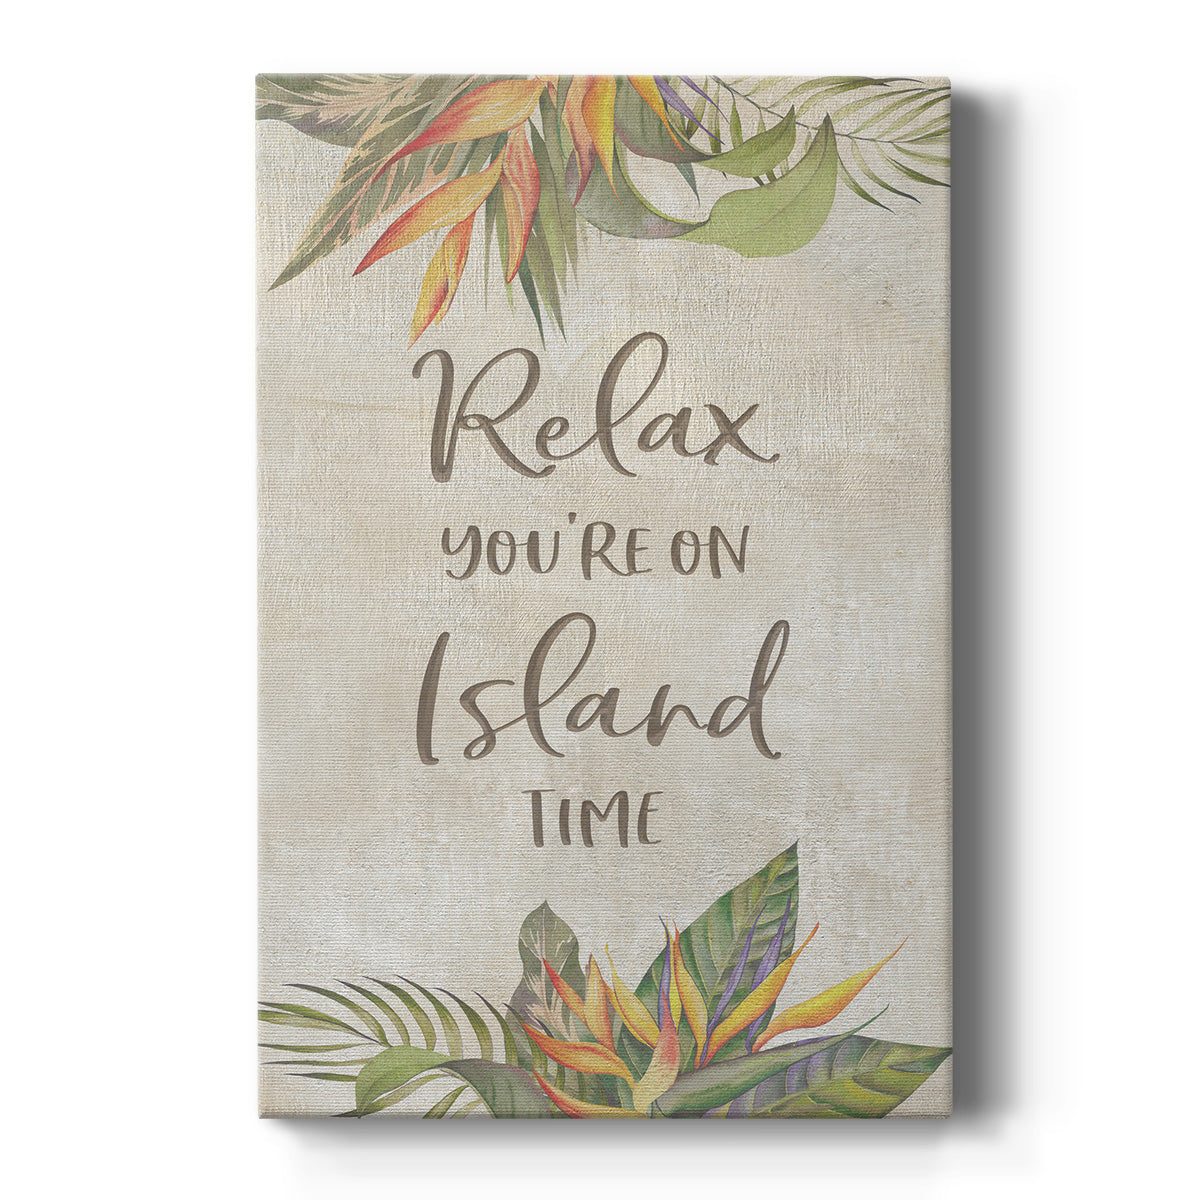 You're On Island Time Premium Gallery Wrapped Canvas - Ready to Hang